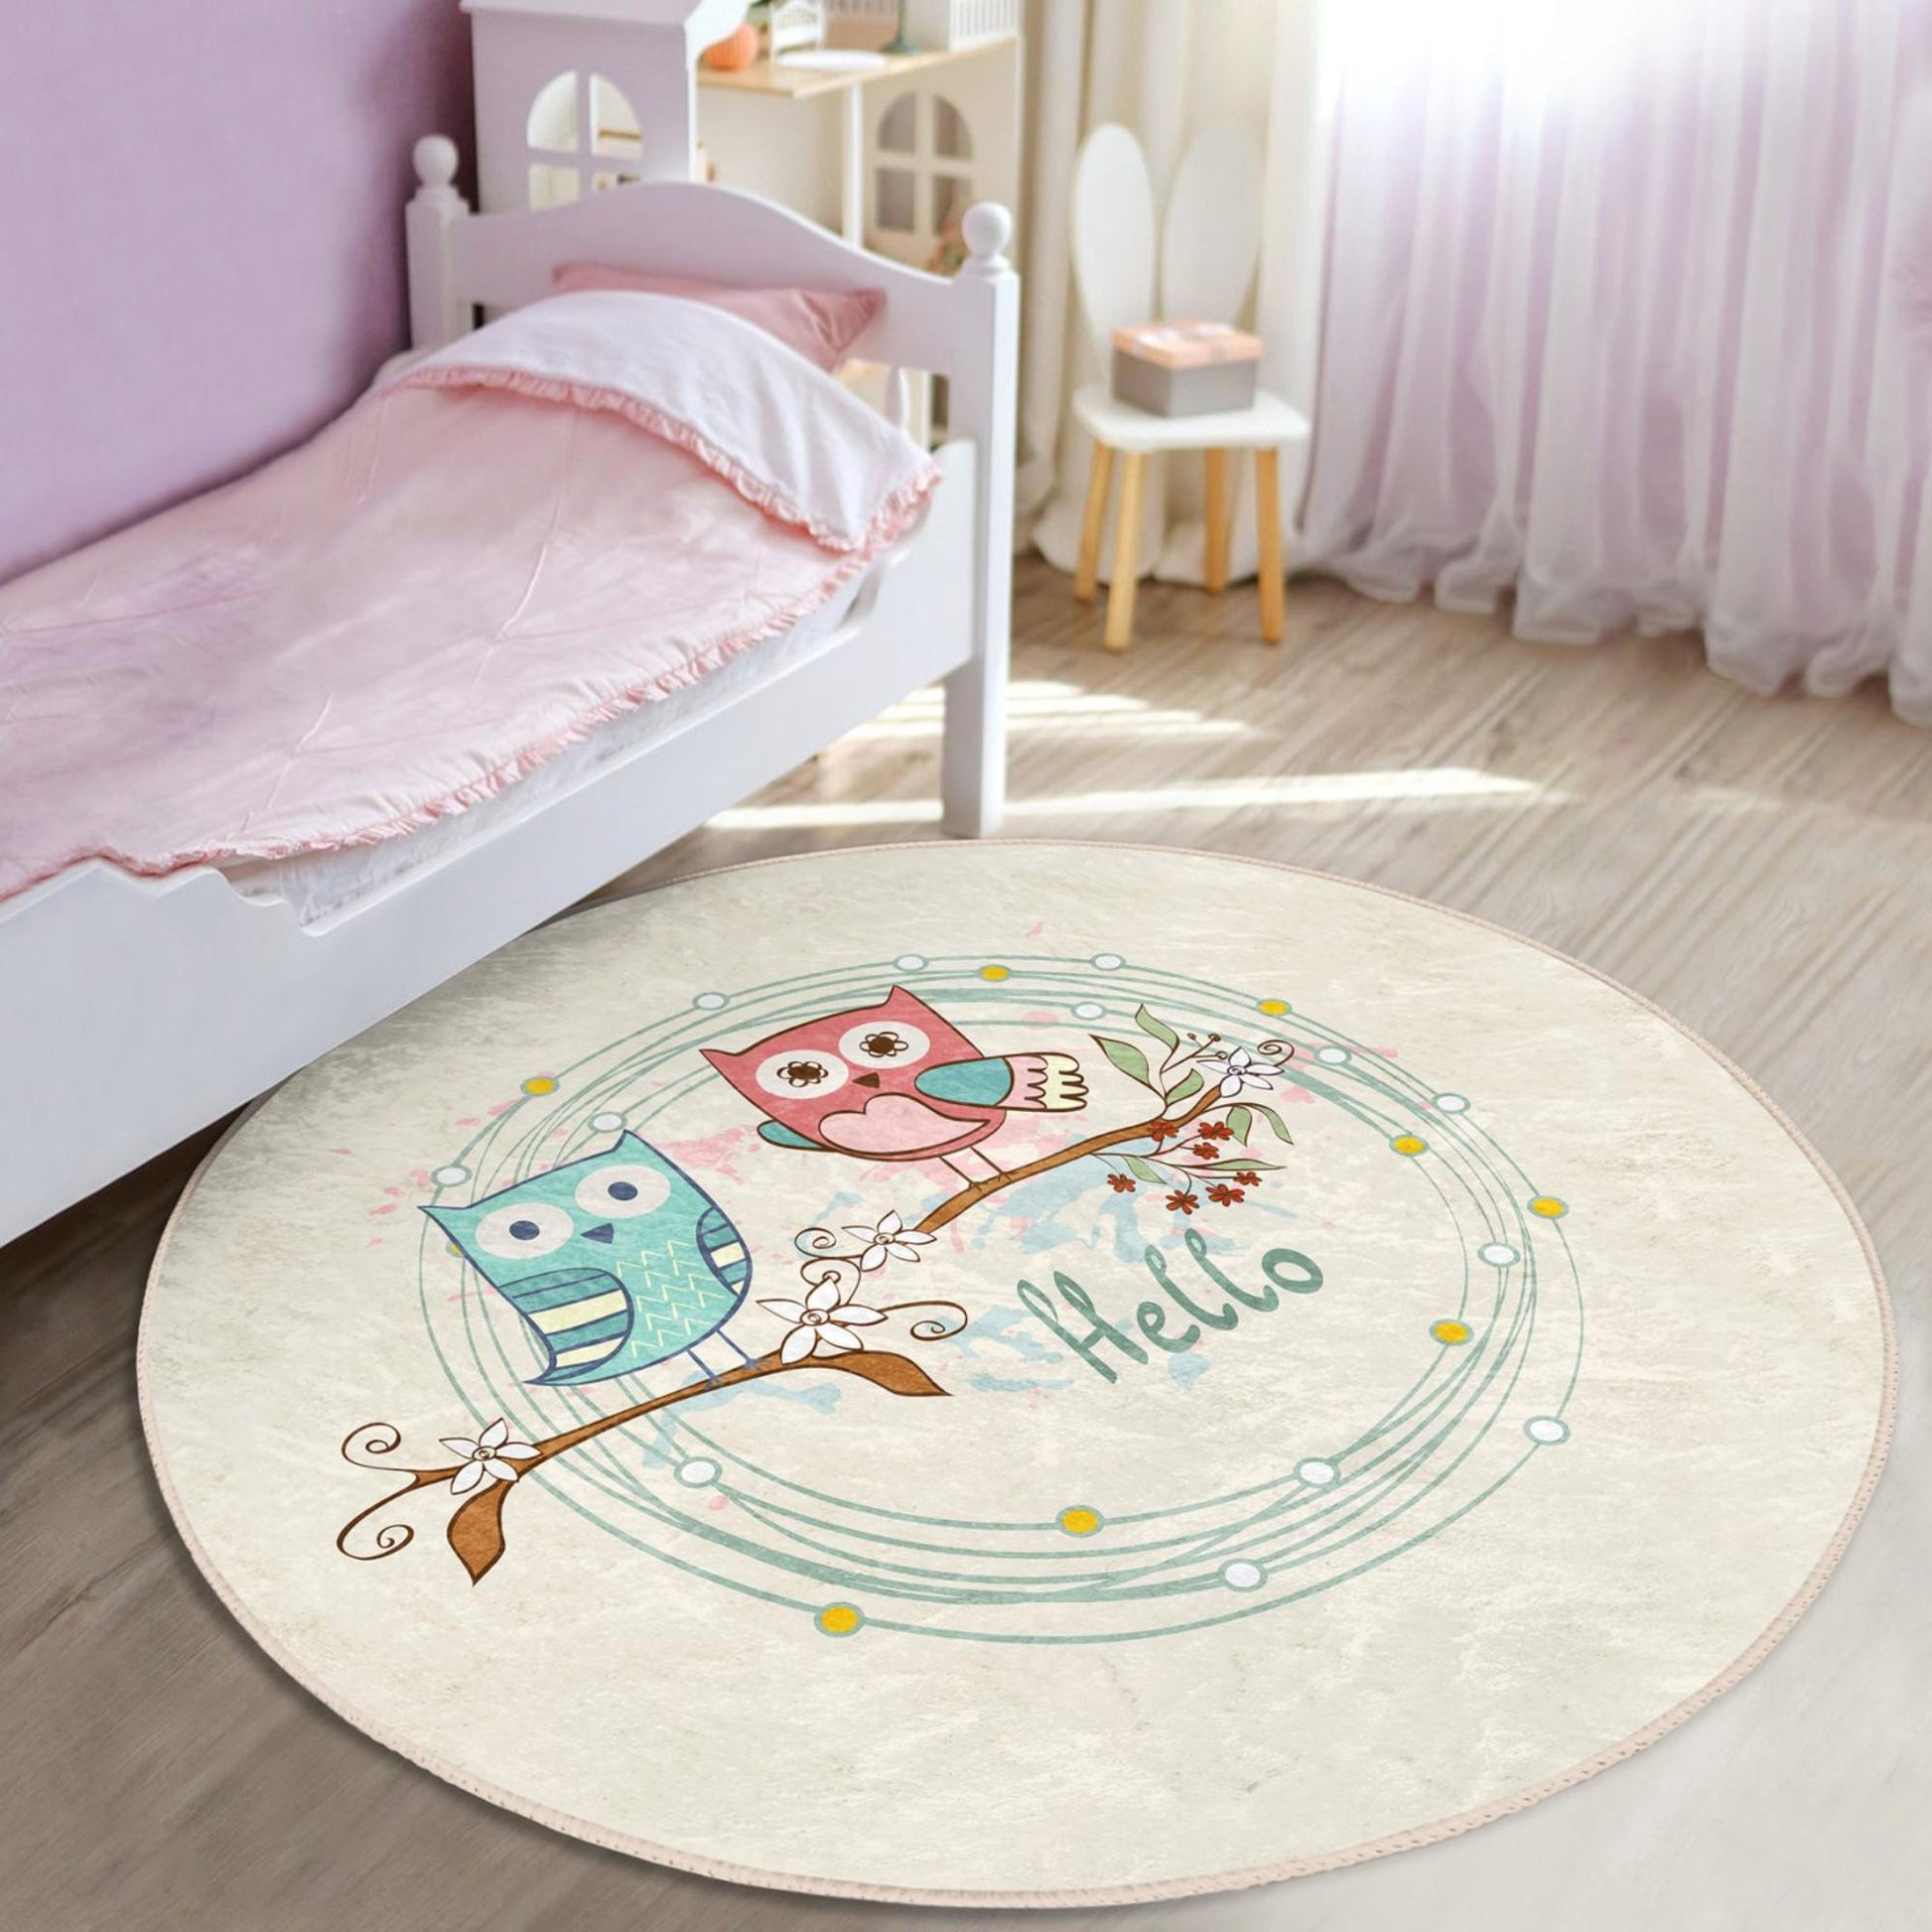 Soft and cozy rug adorned with charming owls on the tree for children's rooms.